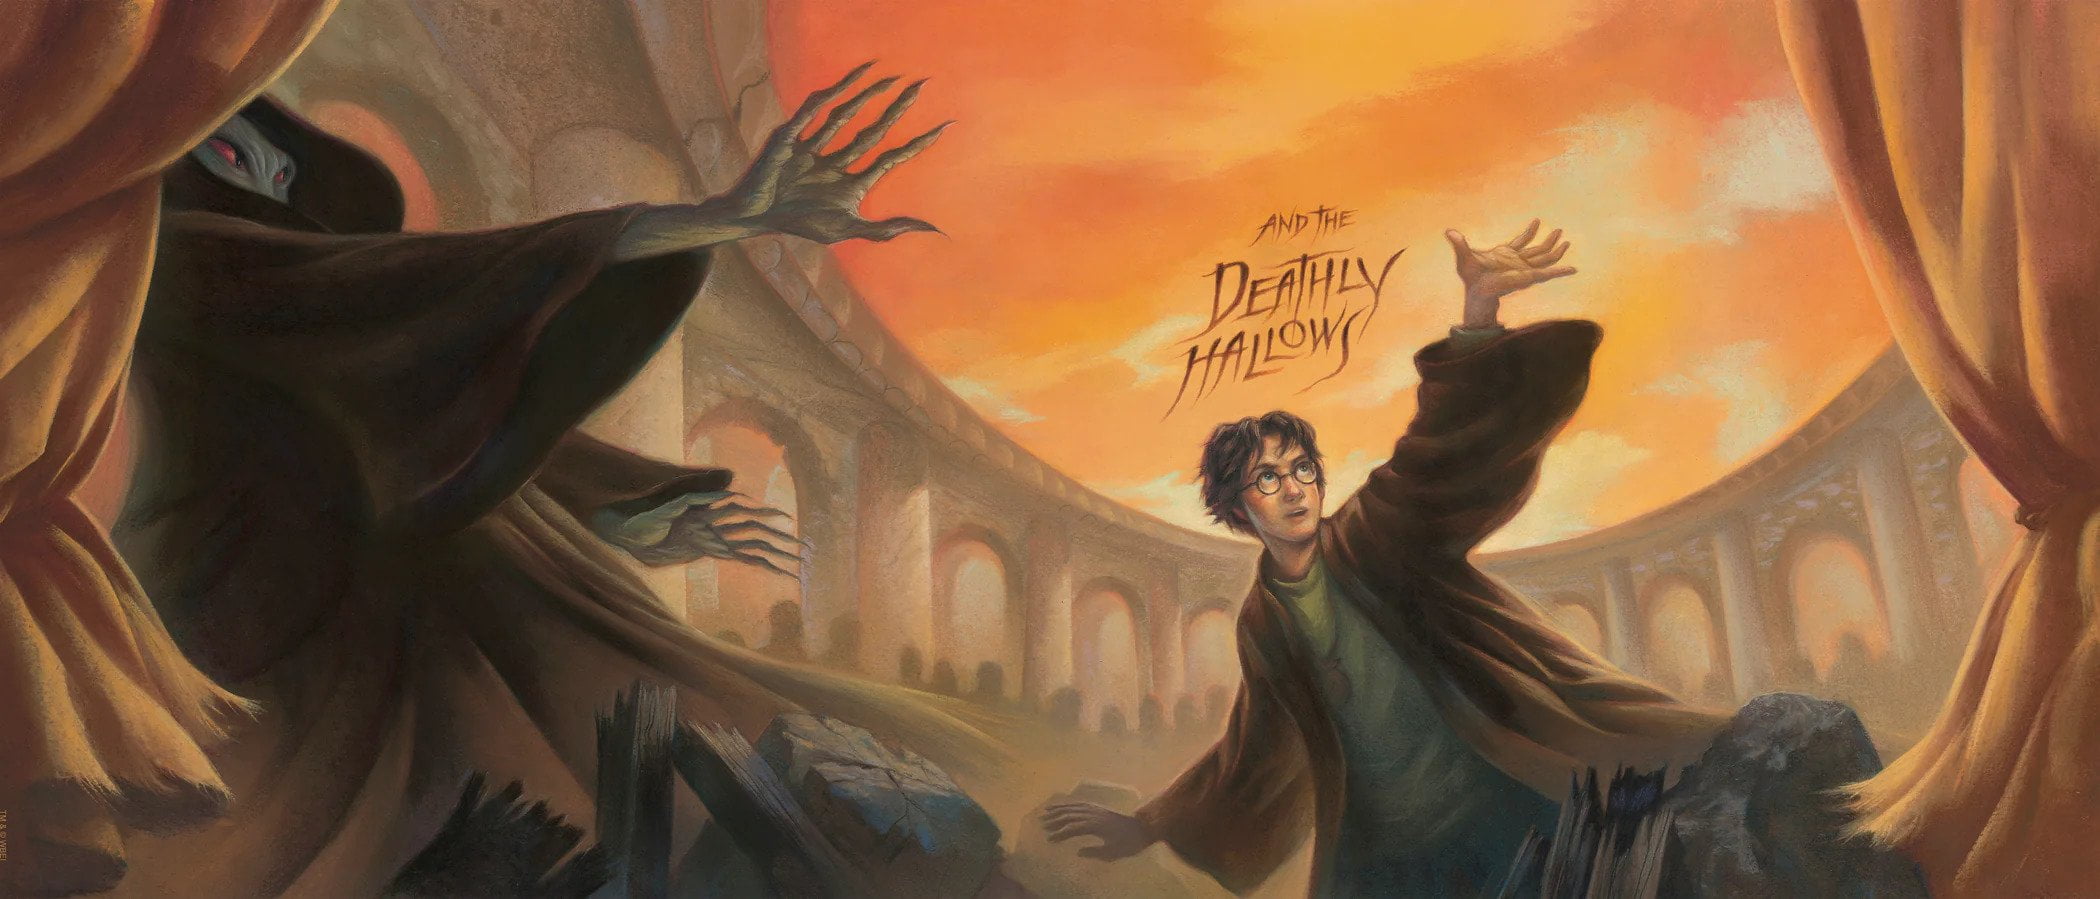 into the deathly hallows harry potter book 7 announcement